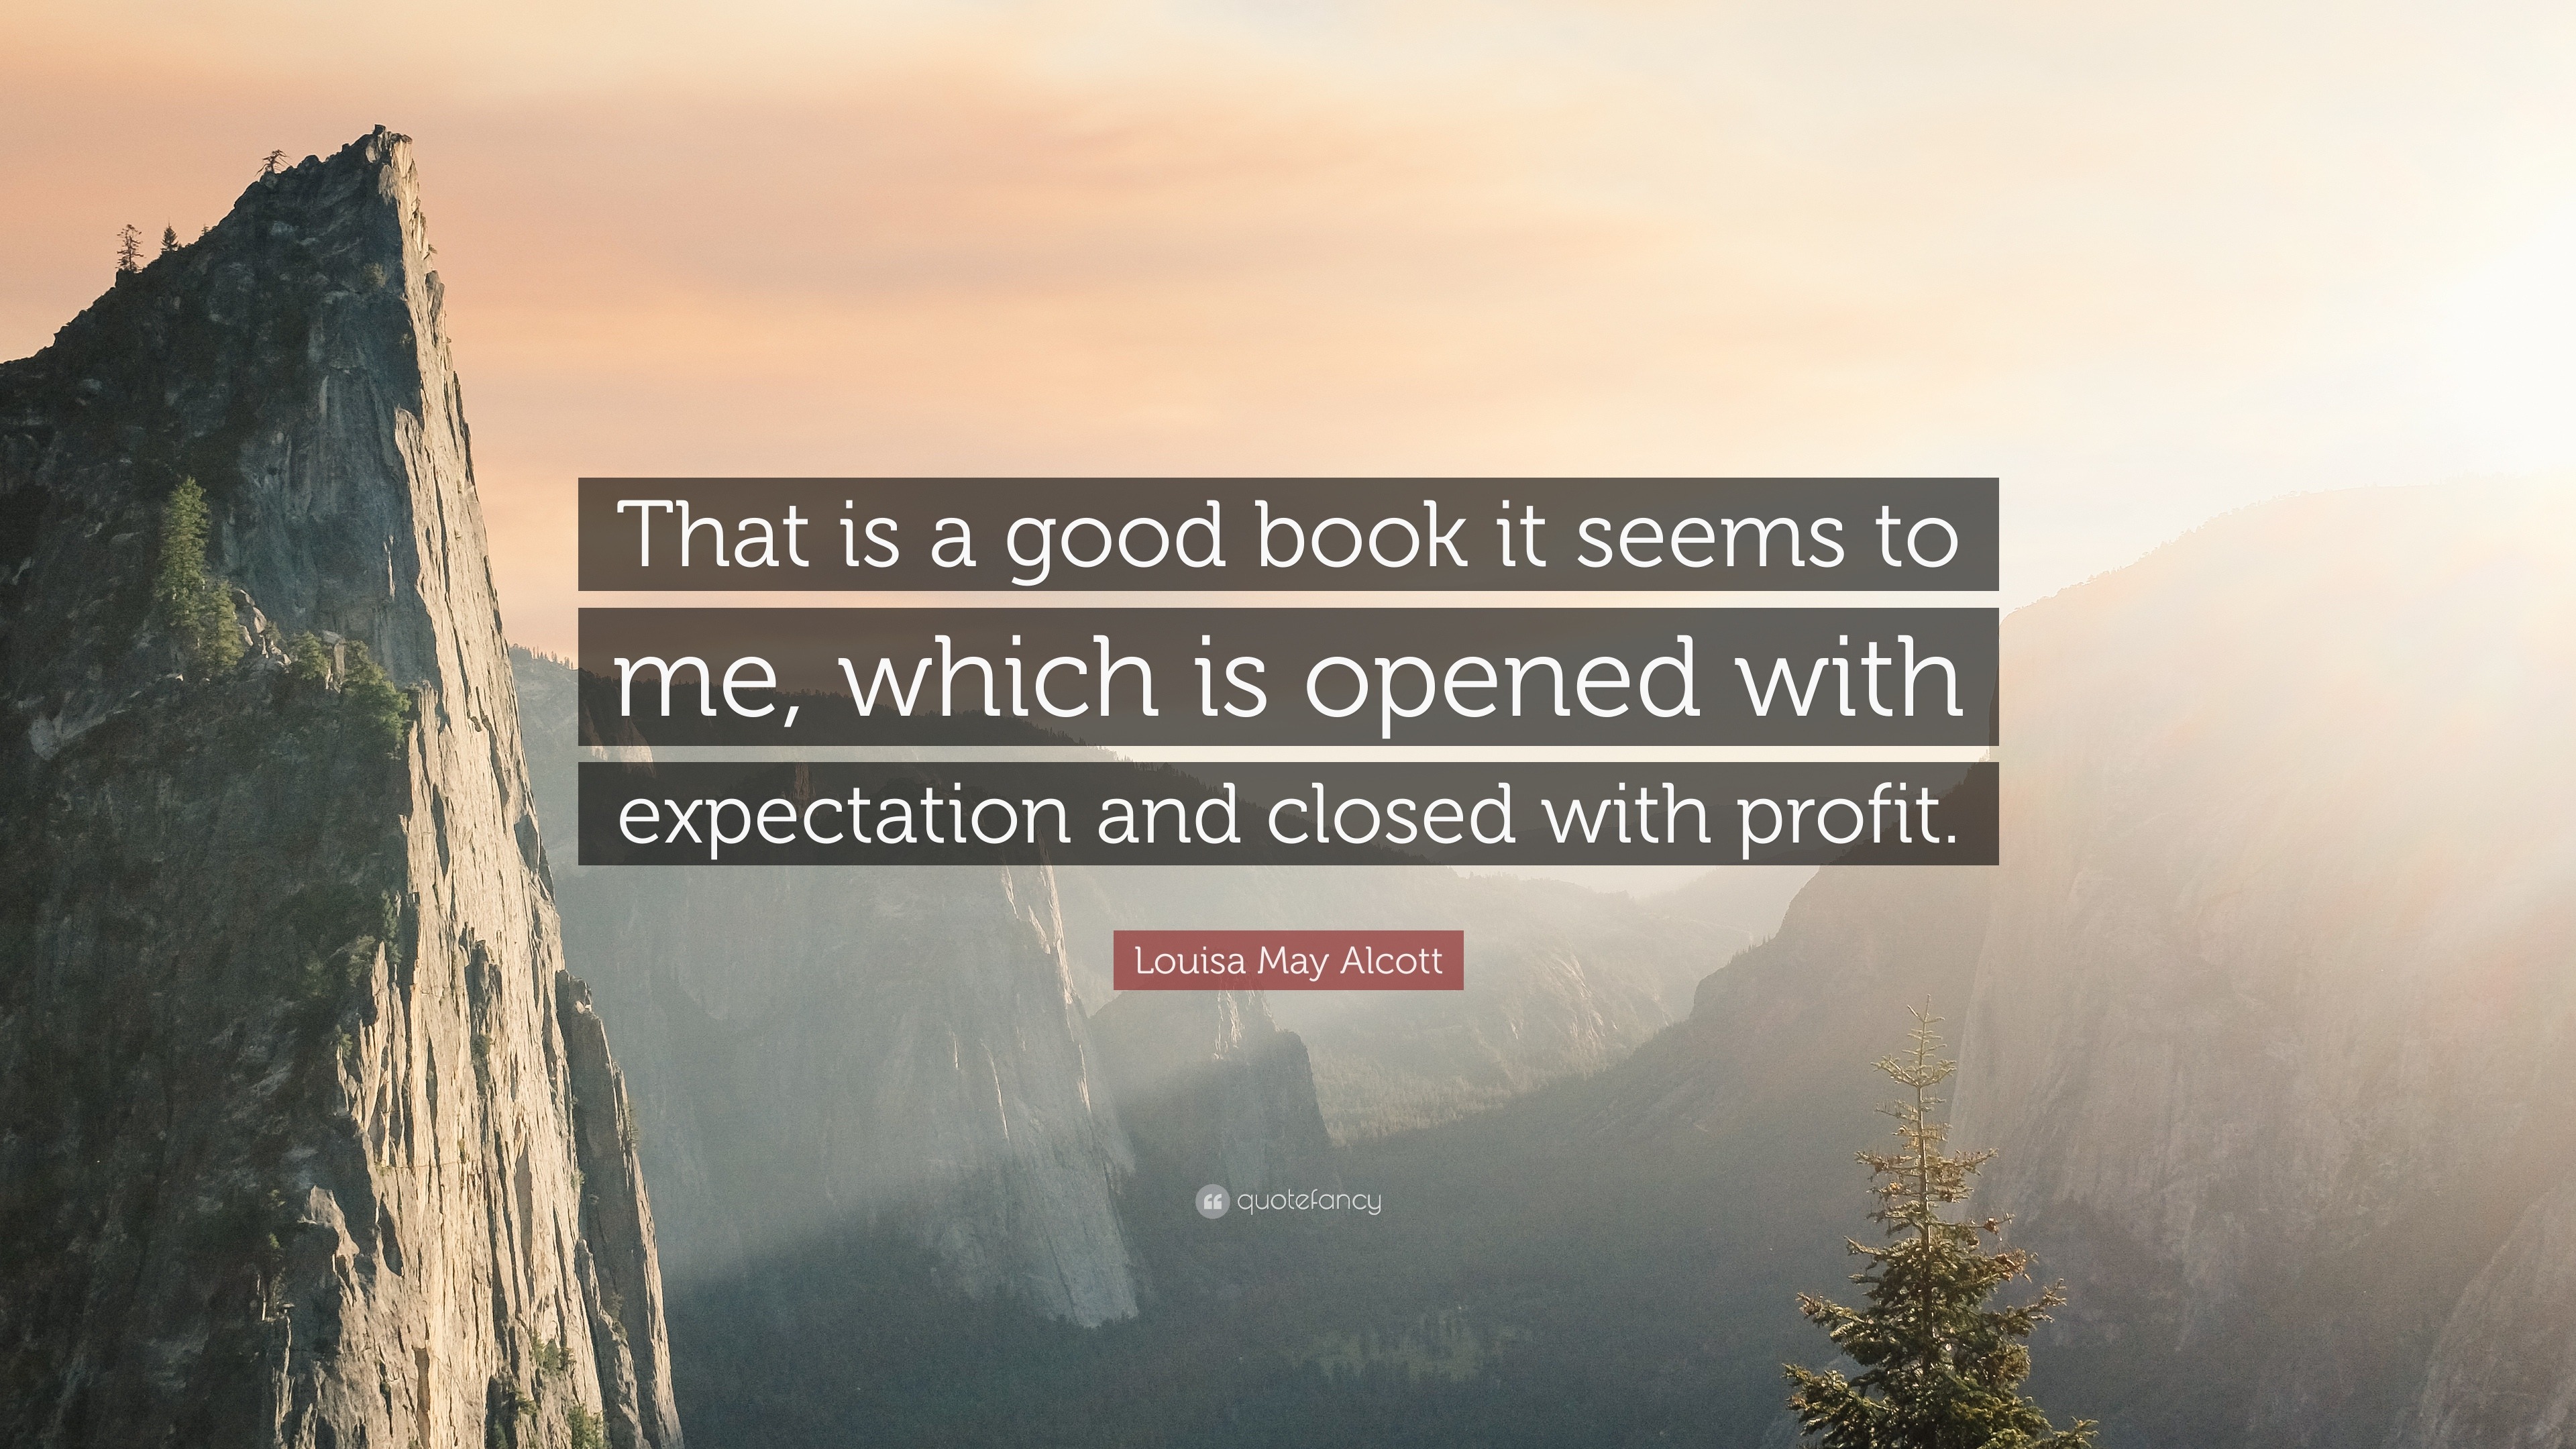 Louisa May Alcott Quote: “That is a good book it seems to me, which is opened with expectation ...